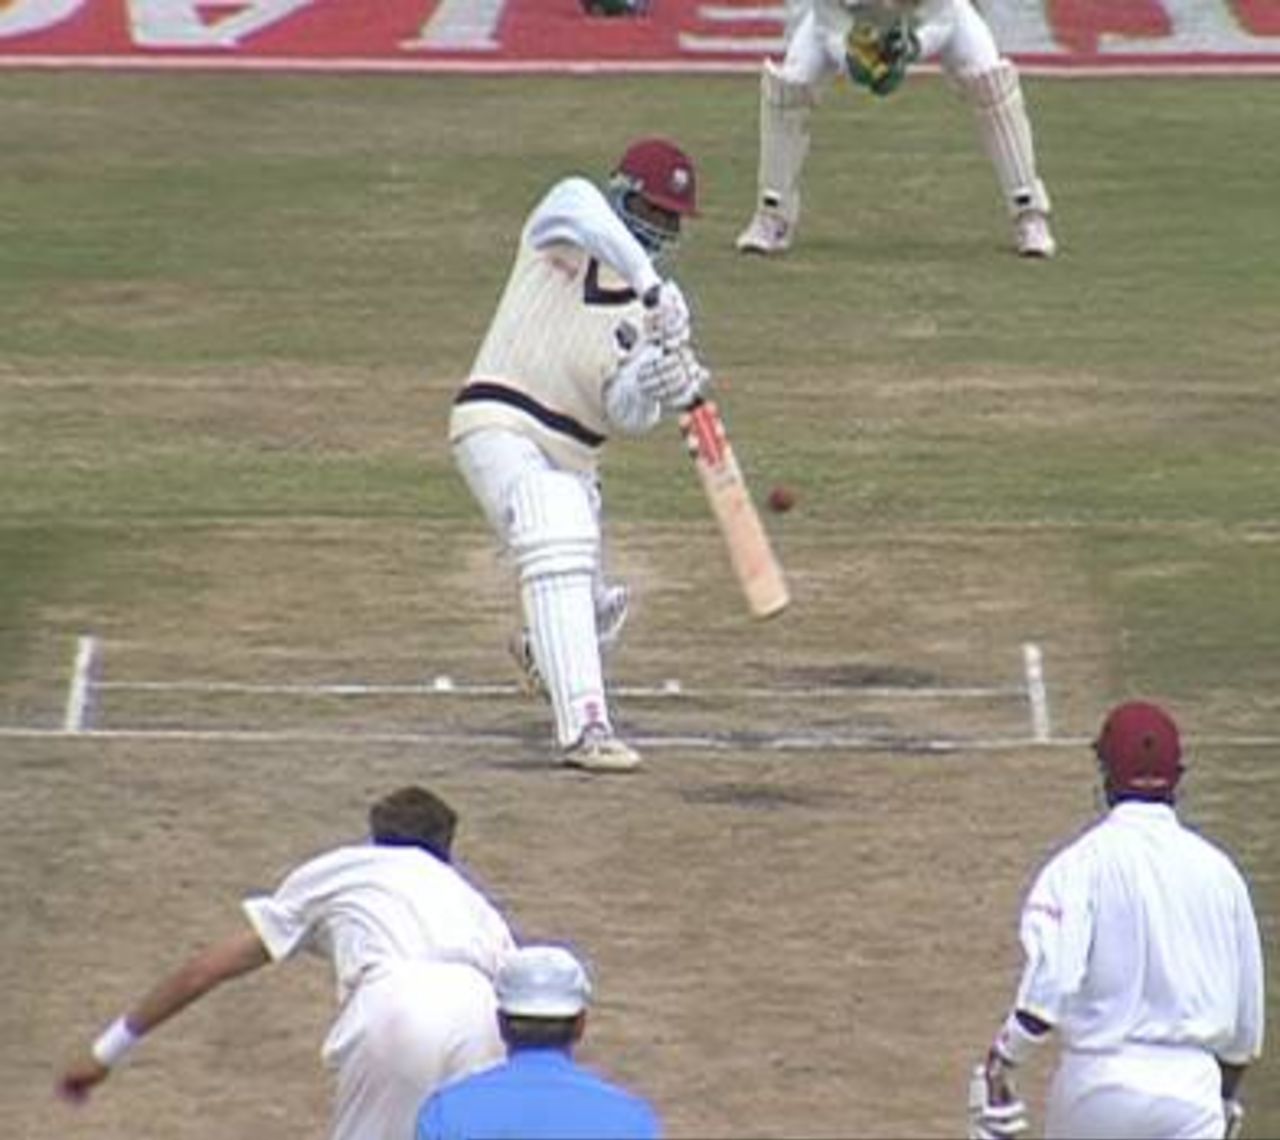 West Indies A opener Robert Samuels' run of poor form continues as he nicks South Africa A's Piet Botha to first slip Gerhardus Liebenberg during the second "Test" at Buffalo Park, East London, 19-22 Dec 1997. Samuels made 3. The non-striker is Suruj Ragoonath.